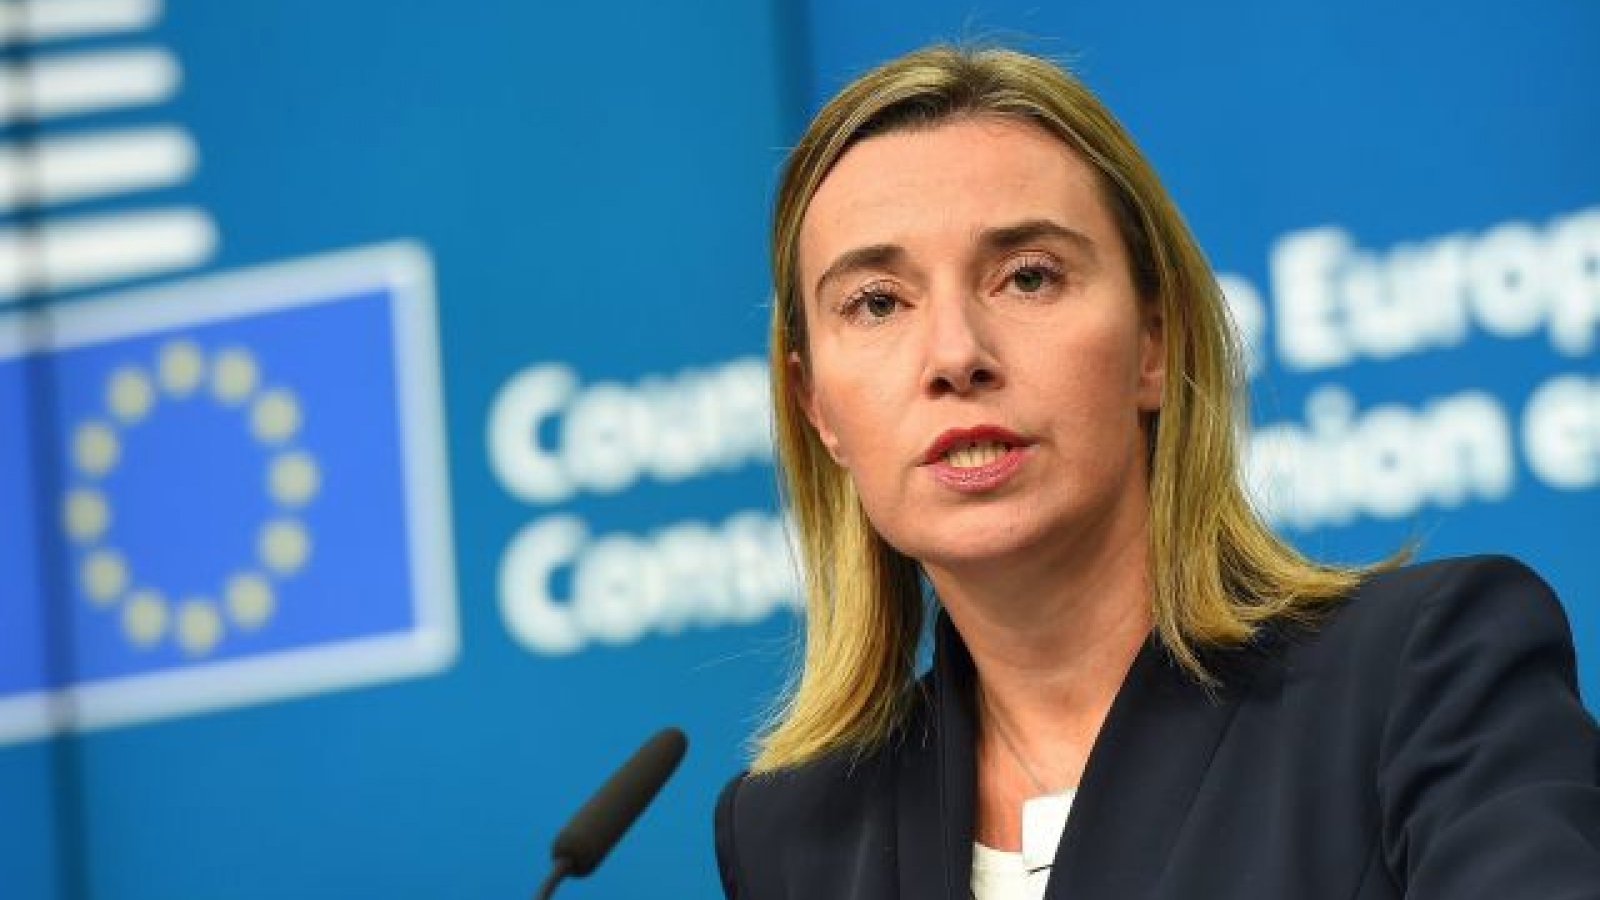 Frederica Mogherini: EU continues its fight against impunity for acts of discrimination and violence against LGBTI persons both inside and outside its territory